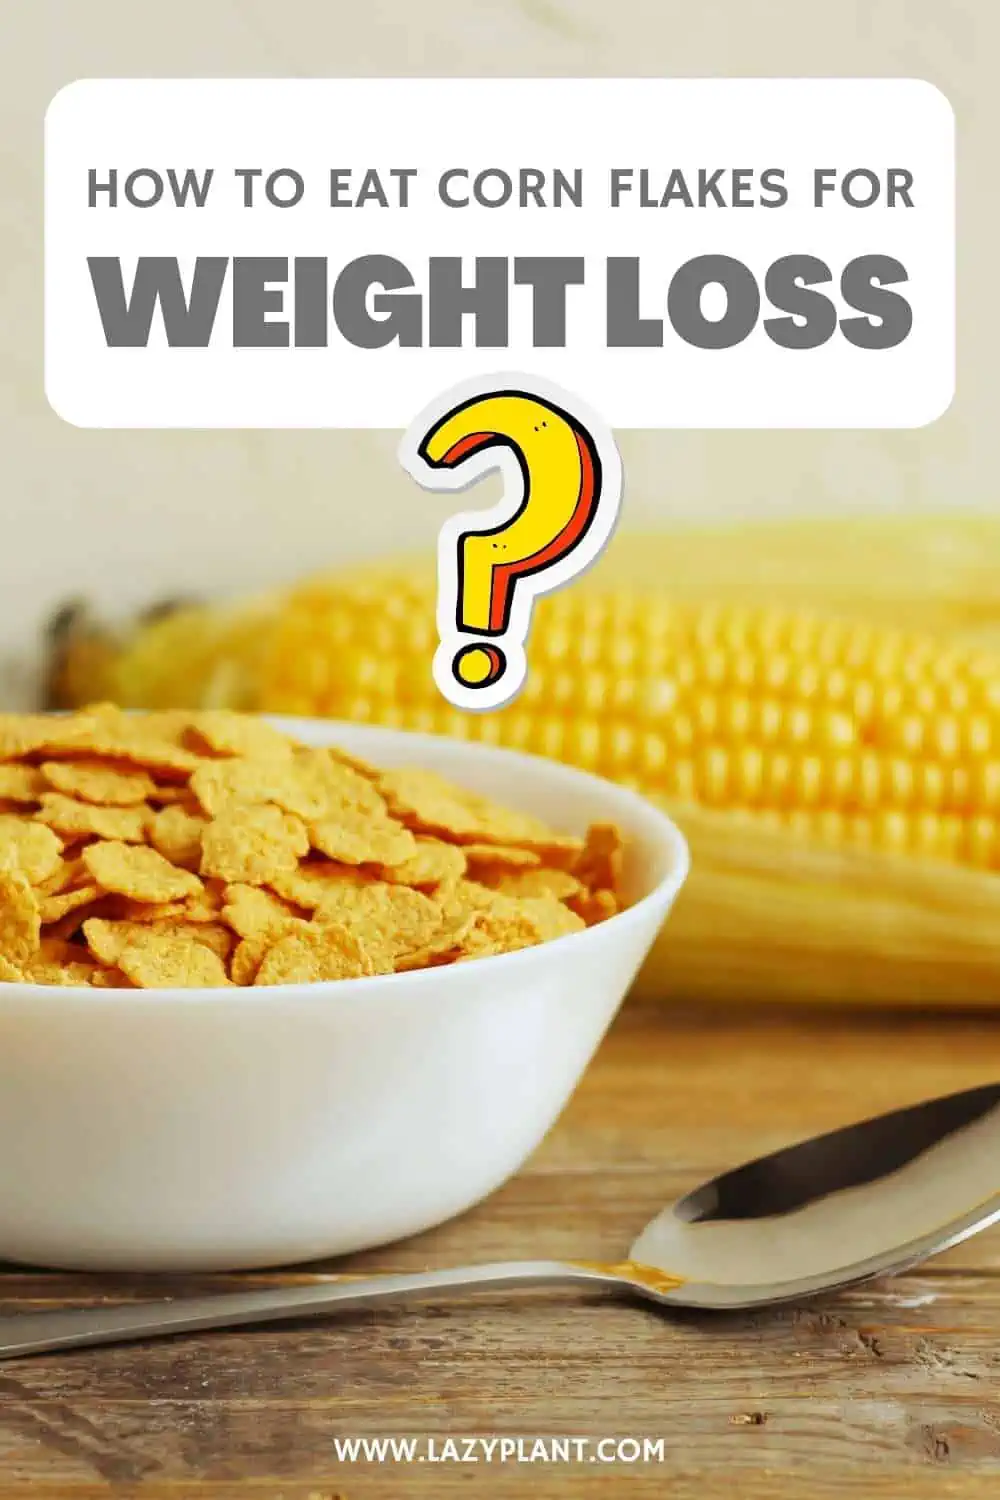 When should I eat corn flakes for weight loss?